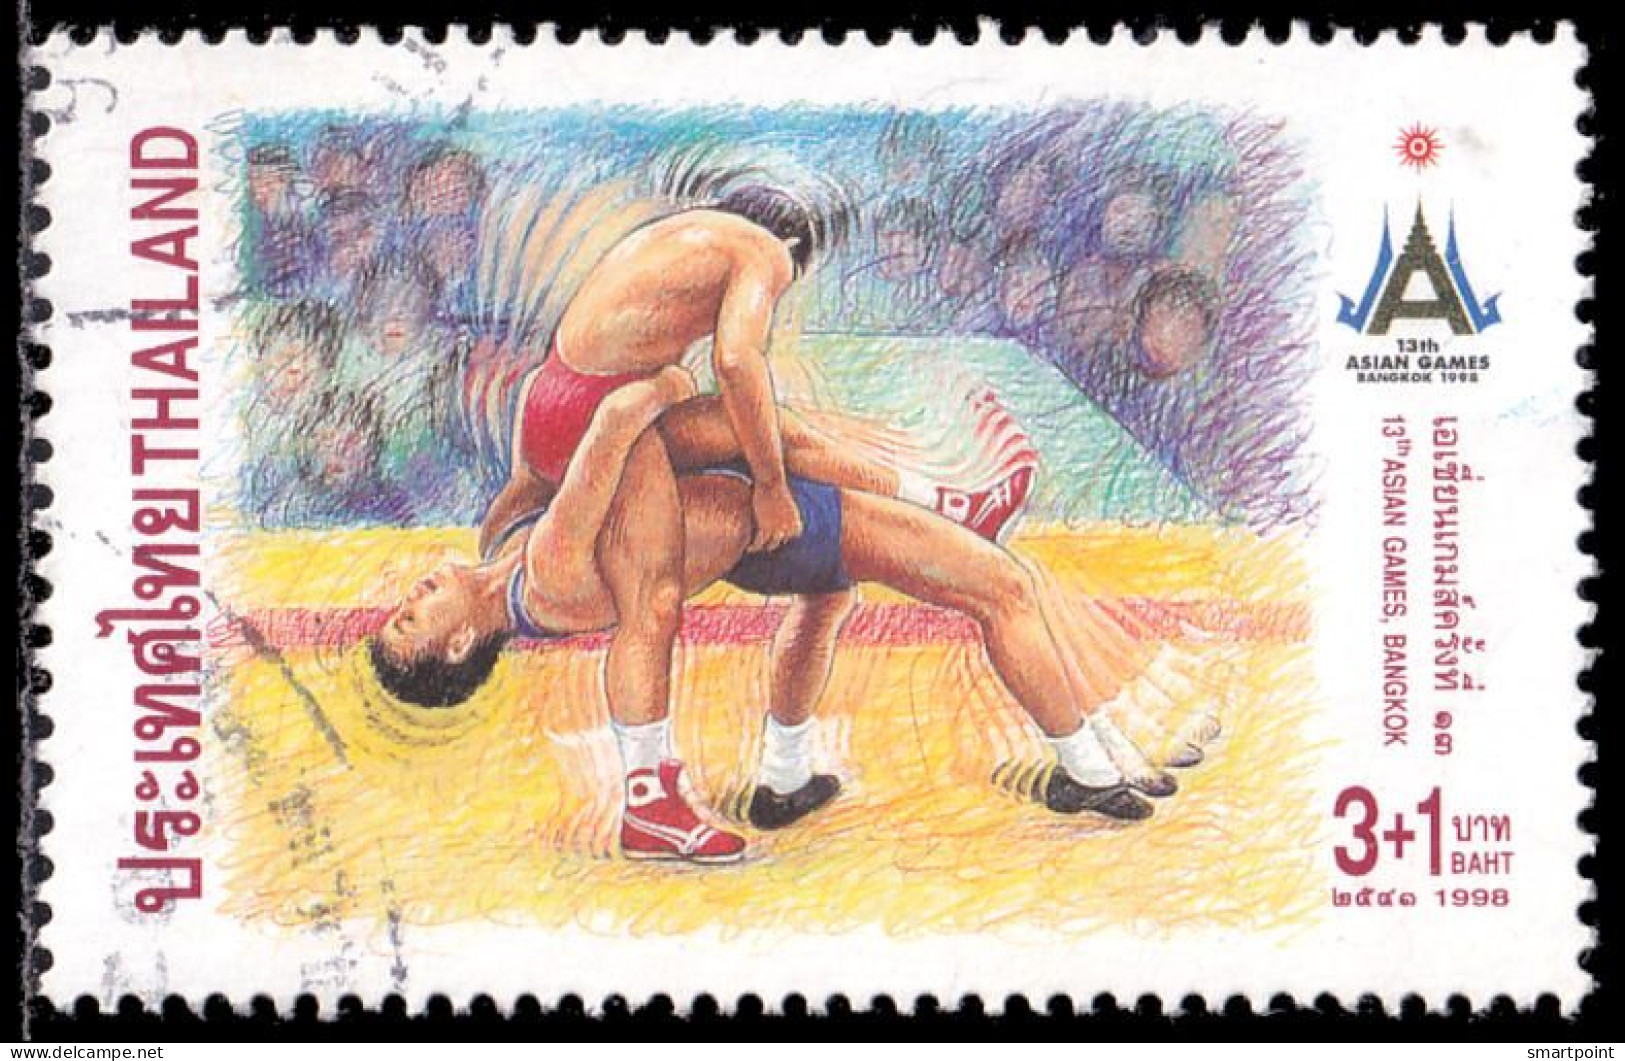 Thailand Stamp 1998 13th Asian Games (2nd Series) 3+1 Baht - Used - Thailand